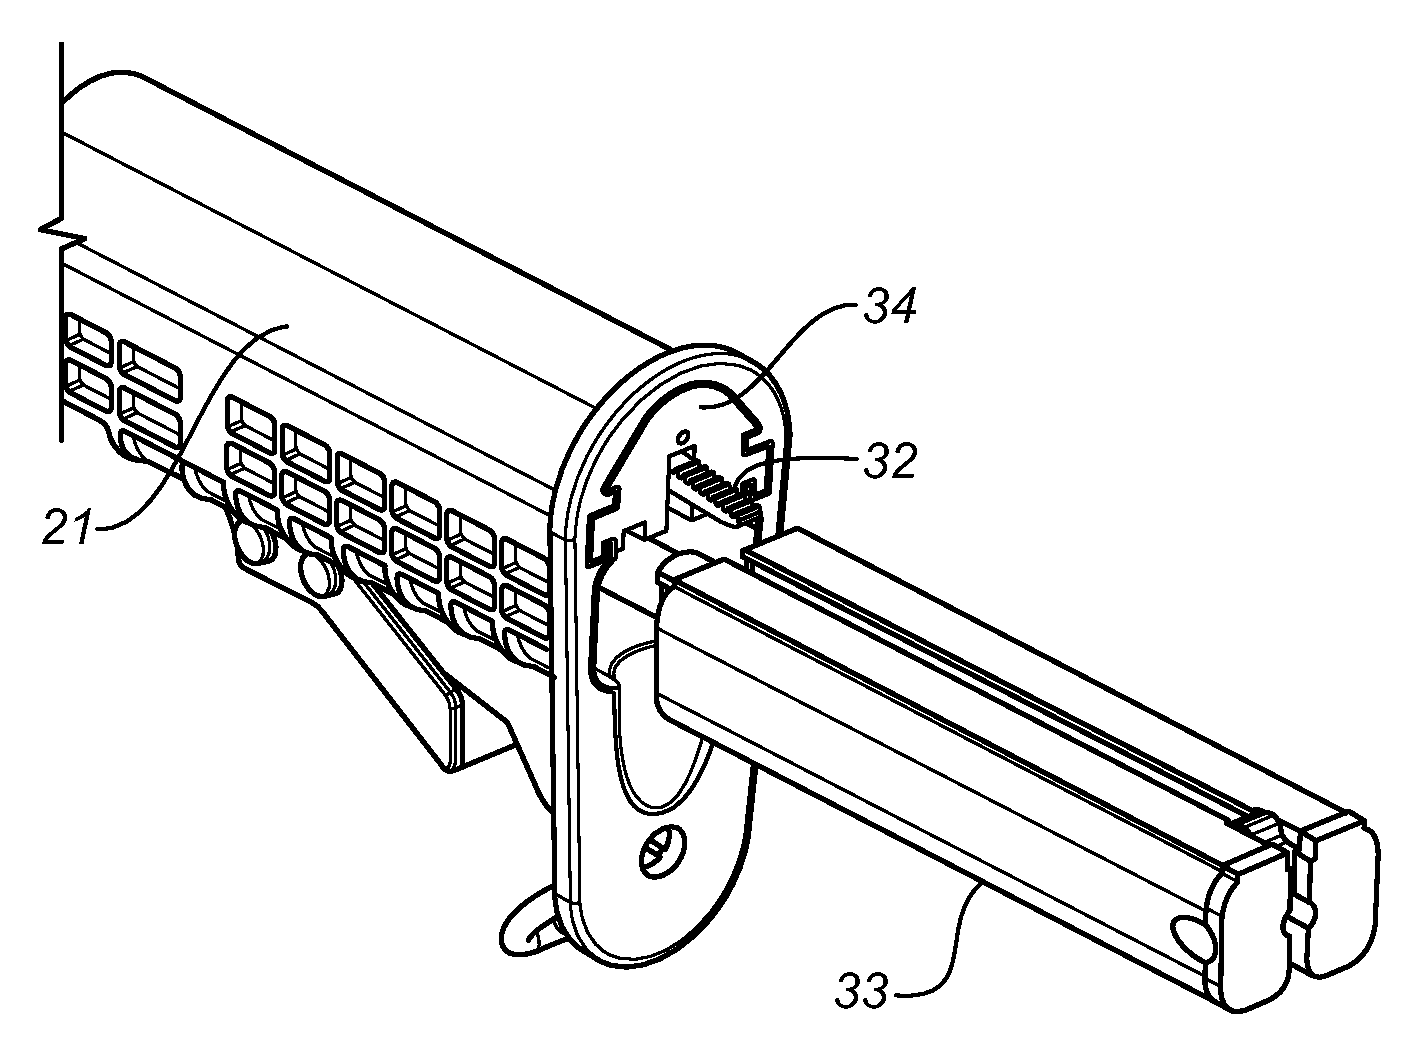 System for providing electrical power to accessories mounted on the powered rail of a weapon